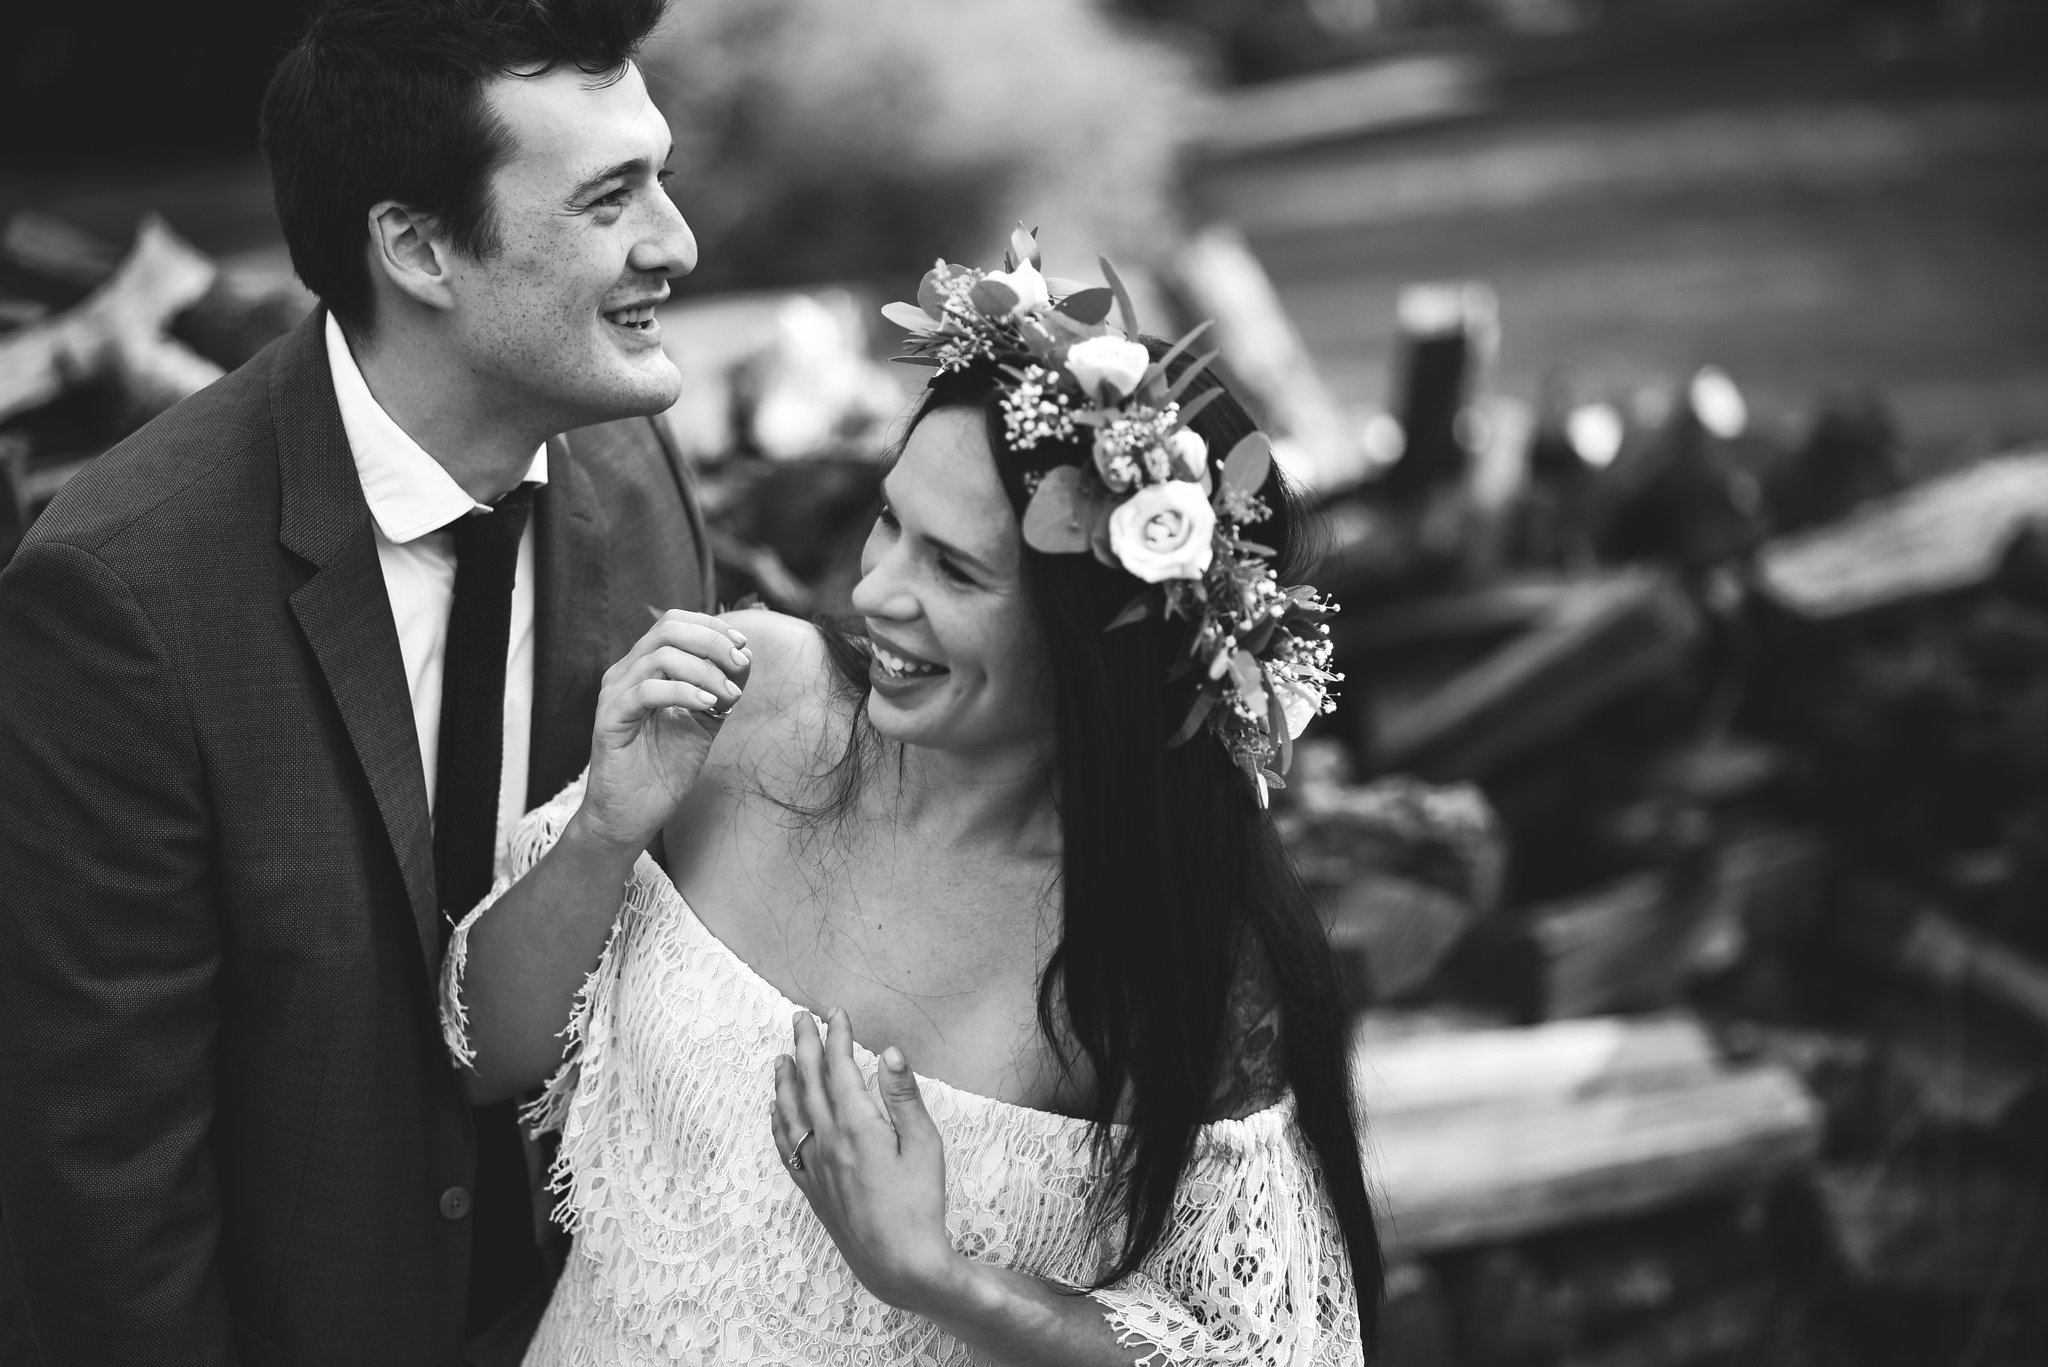  Maryland, Eastern Shore, Baltimore Wedding Photographer, Romantic, Boho, Backyard Wedding, Nature, Bride and Groom Laughing Together, Black and White Photo, Flower Crown 